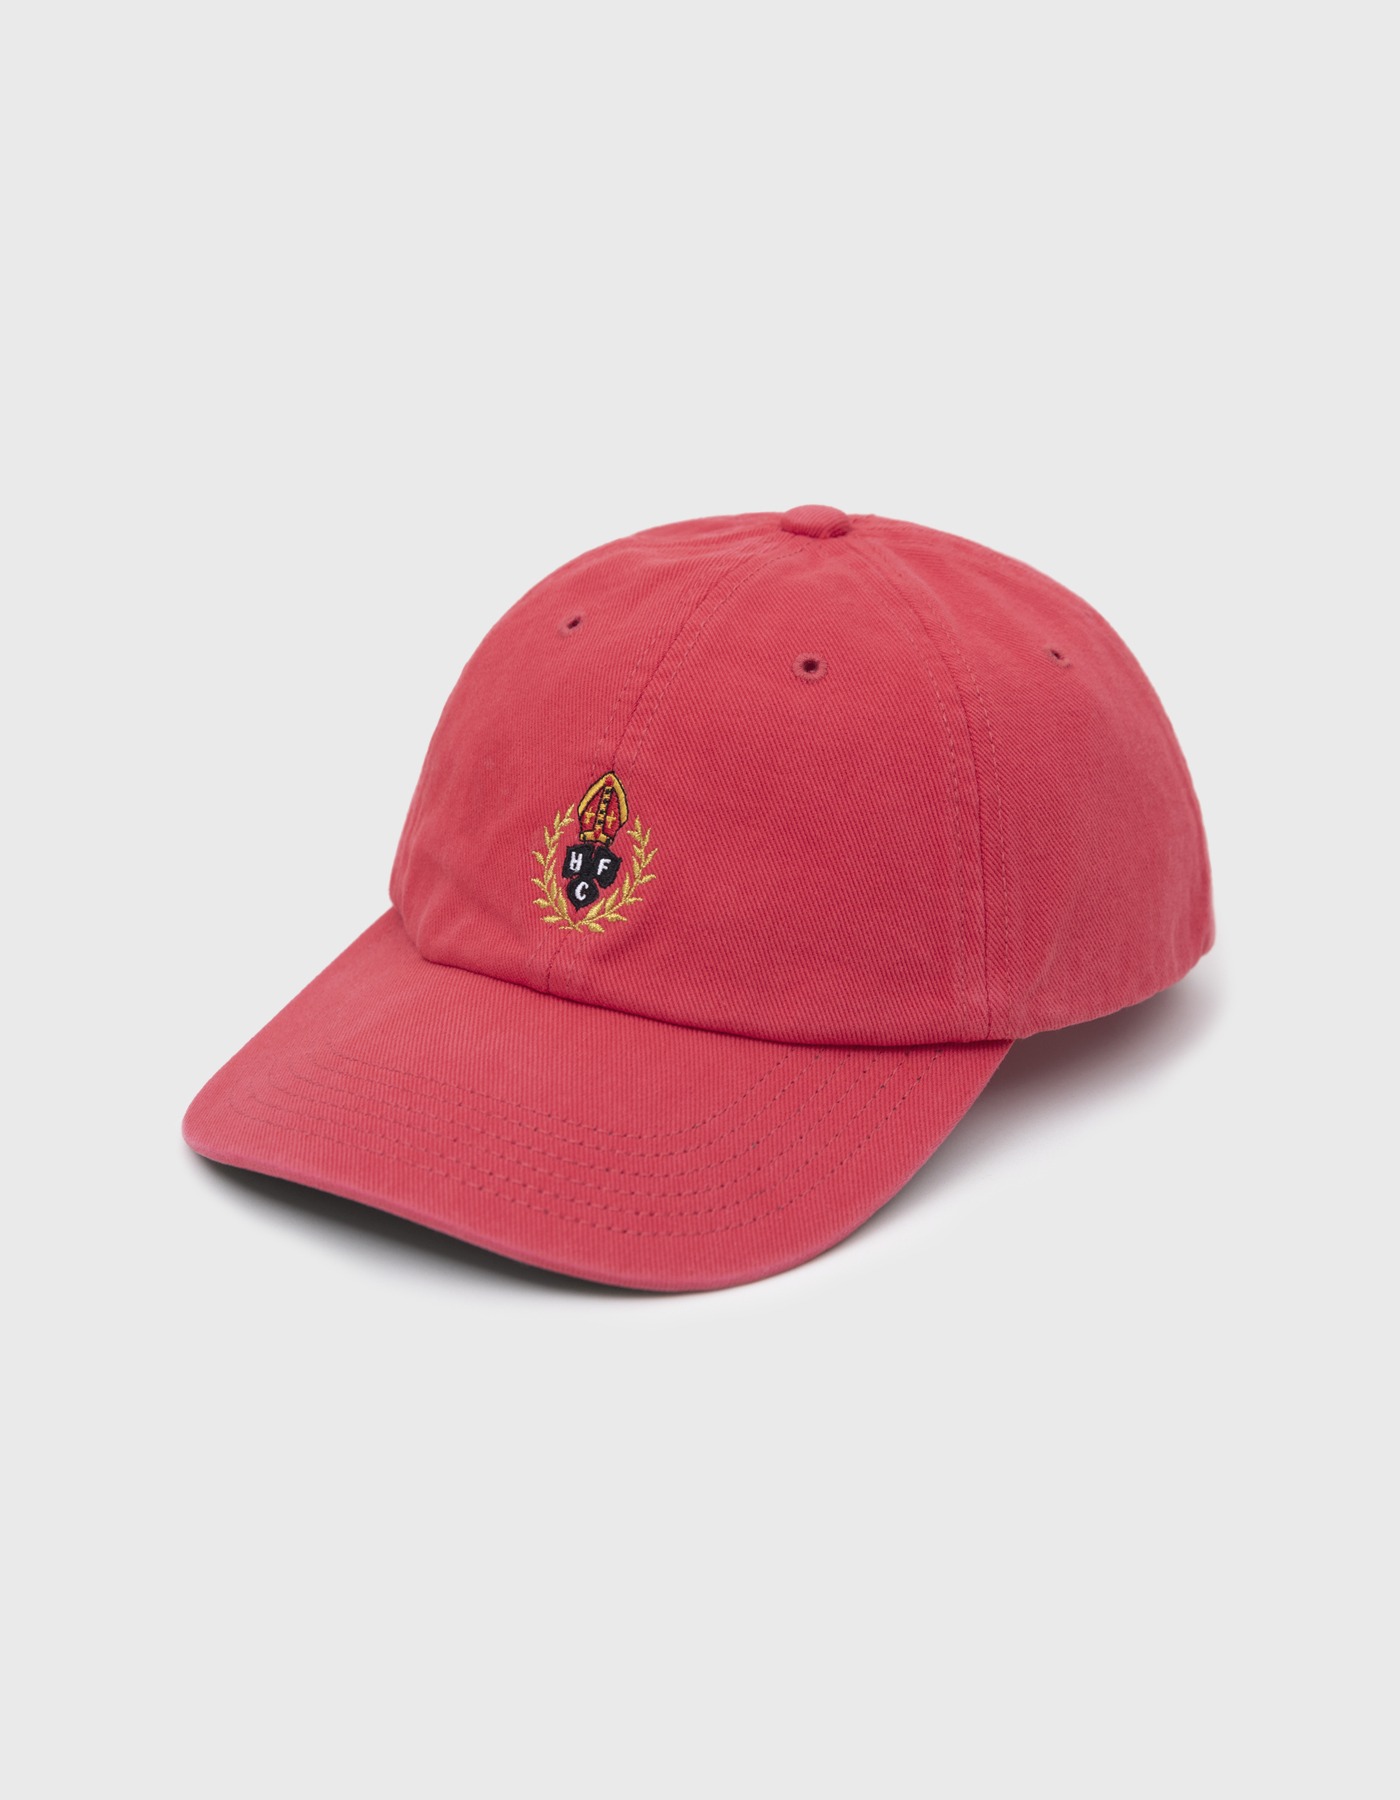 HFC CREST TWILL WASHED CAP / Red